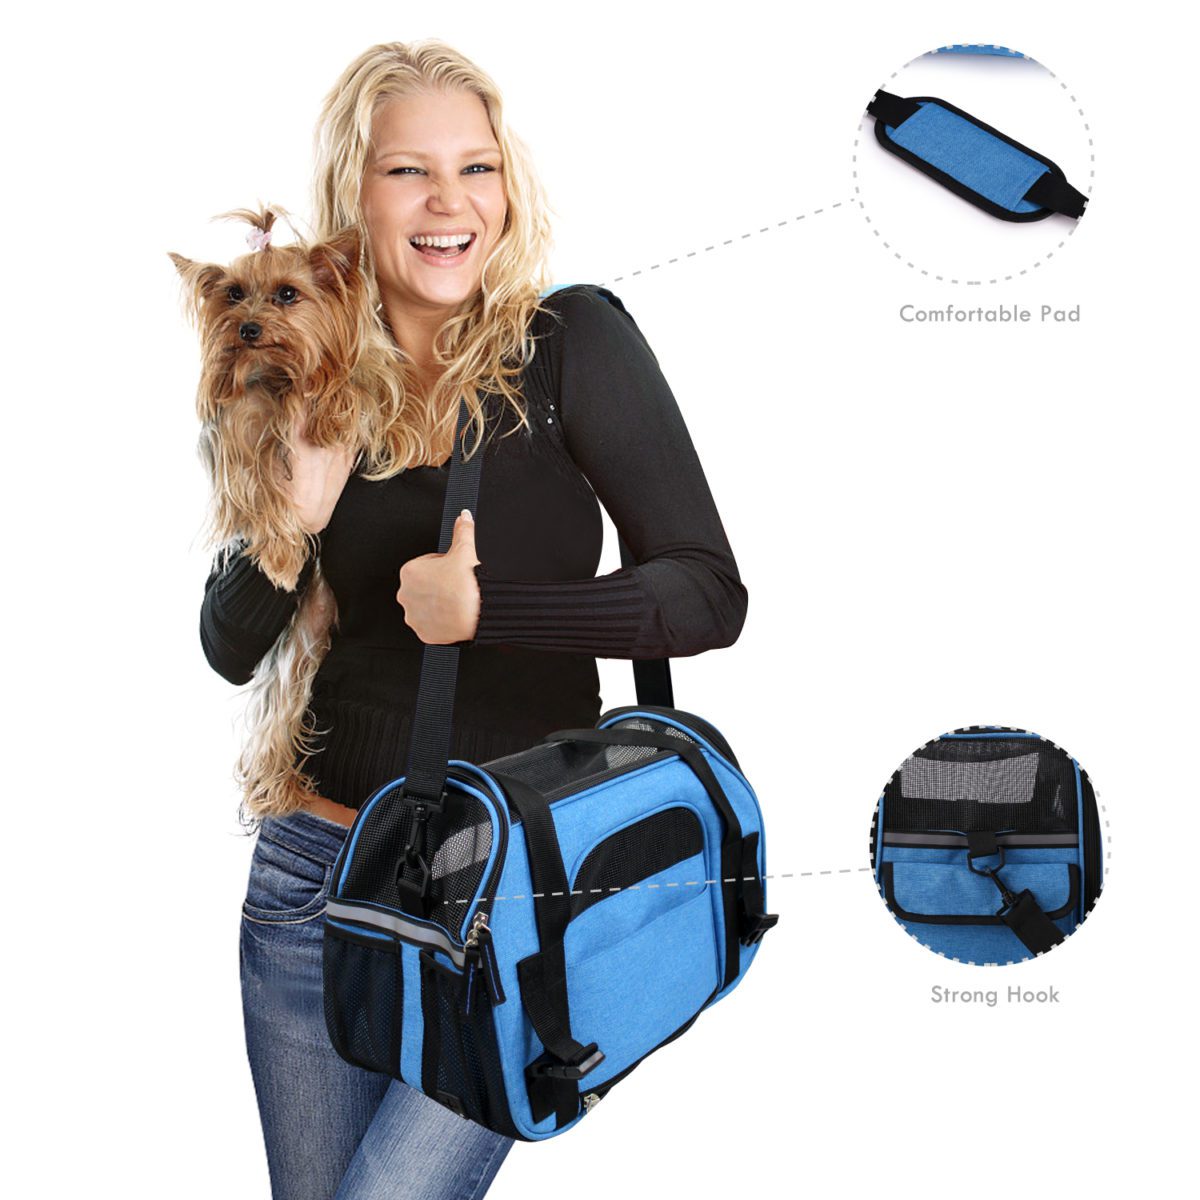 Airline Travel for Small Animals/Cats Soft Sided Pet Carrier The security belt loop permits the provider to be restrained with a car seat belt for automobile journey. Made with sturdy materials A small zipper opening on the prime of the provider that permits you to shortly unzip and attain into the bag to entry your pet